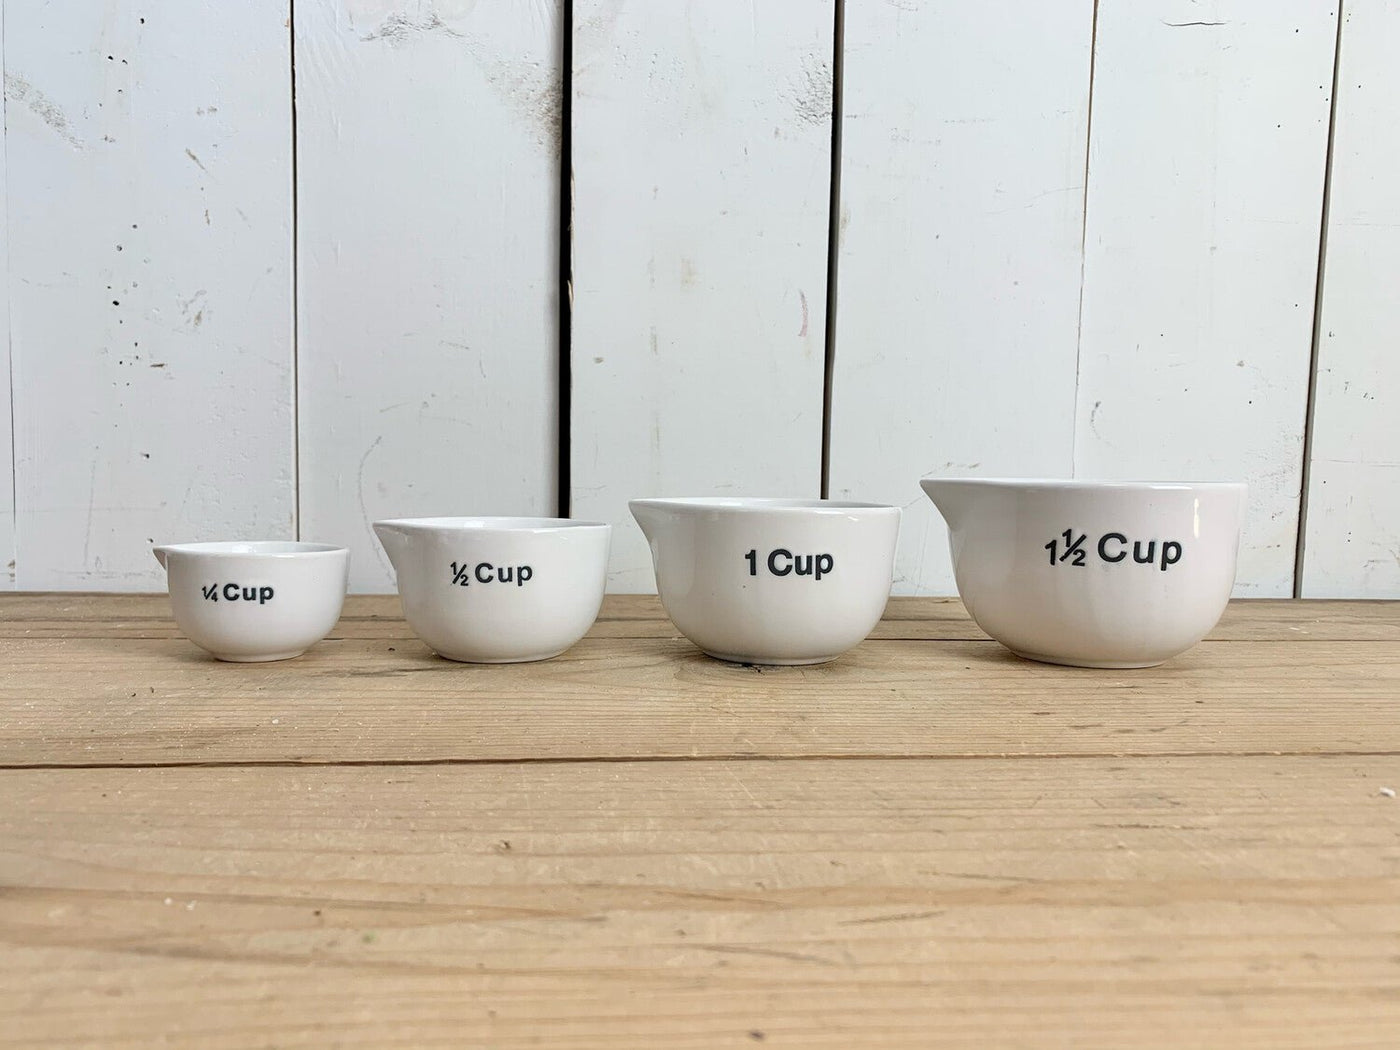 Stoneware Measuring Cups with Wax Relief Pattern, White, Set of 4